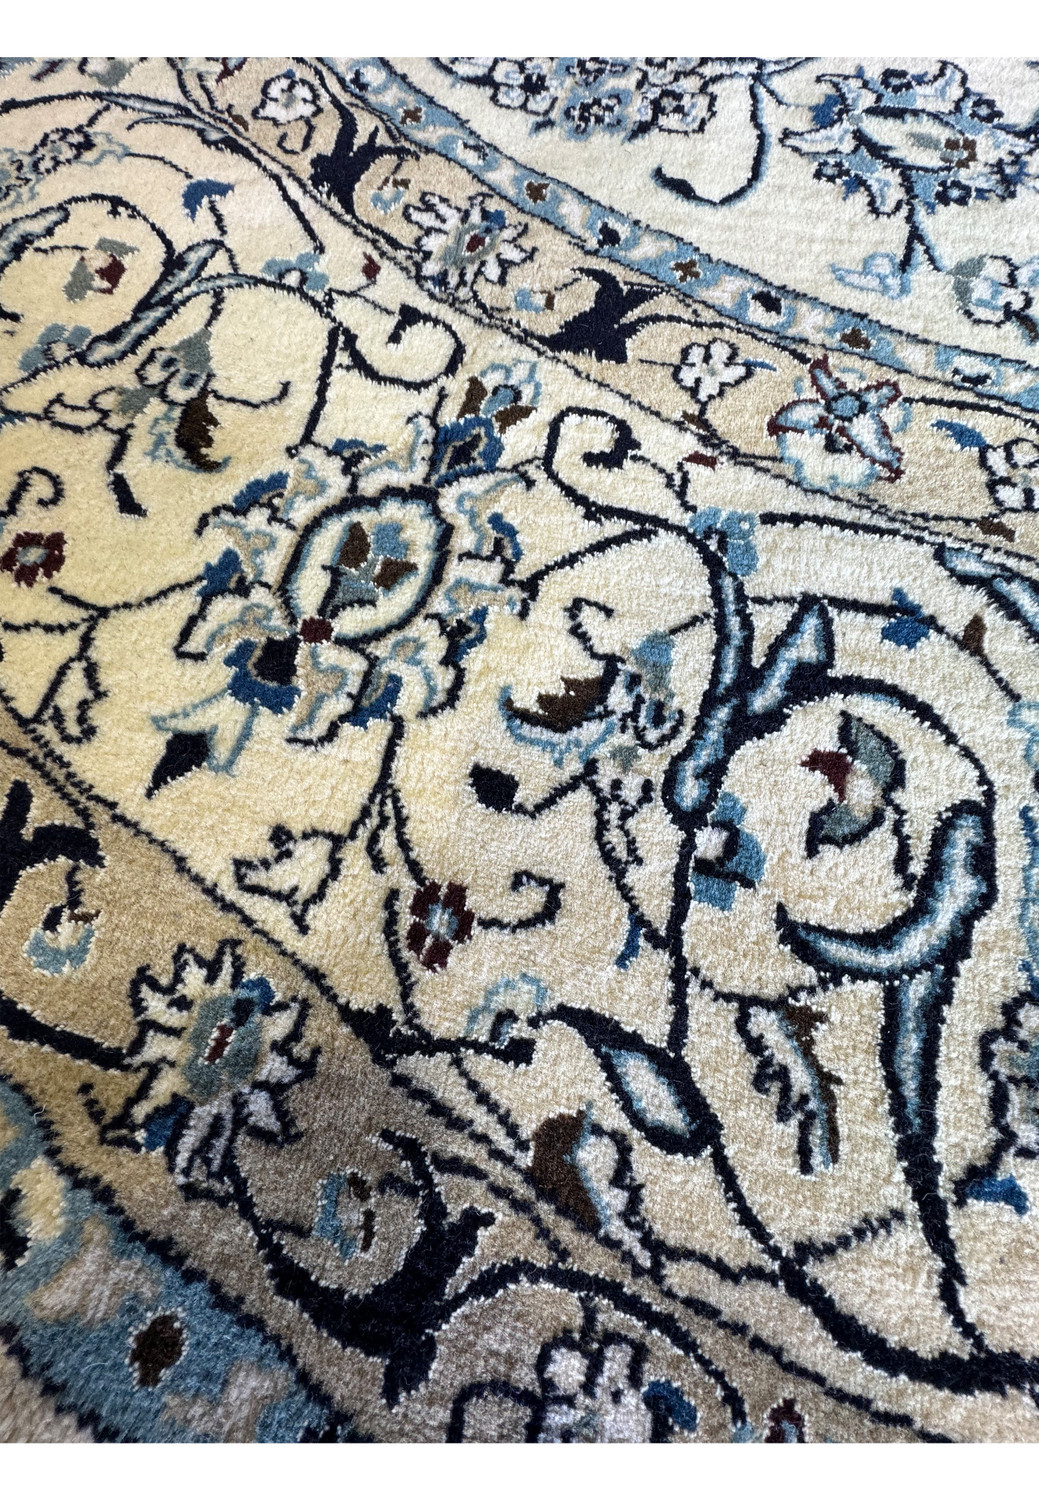 Zoomed-in view of the Persian Nain Round Rug's back demonstrating the fine handwoven knots and quality craftsmanship